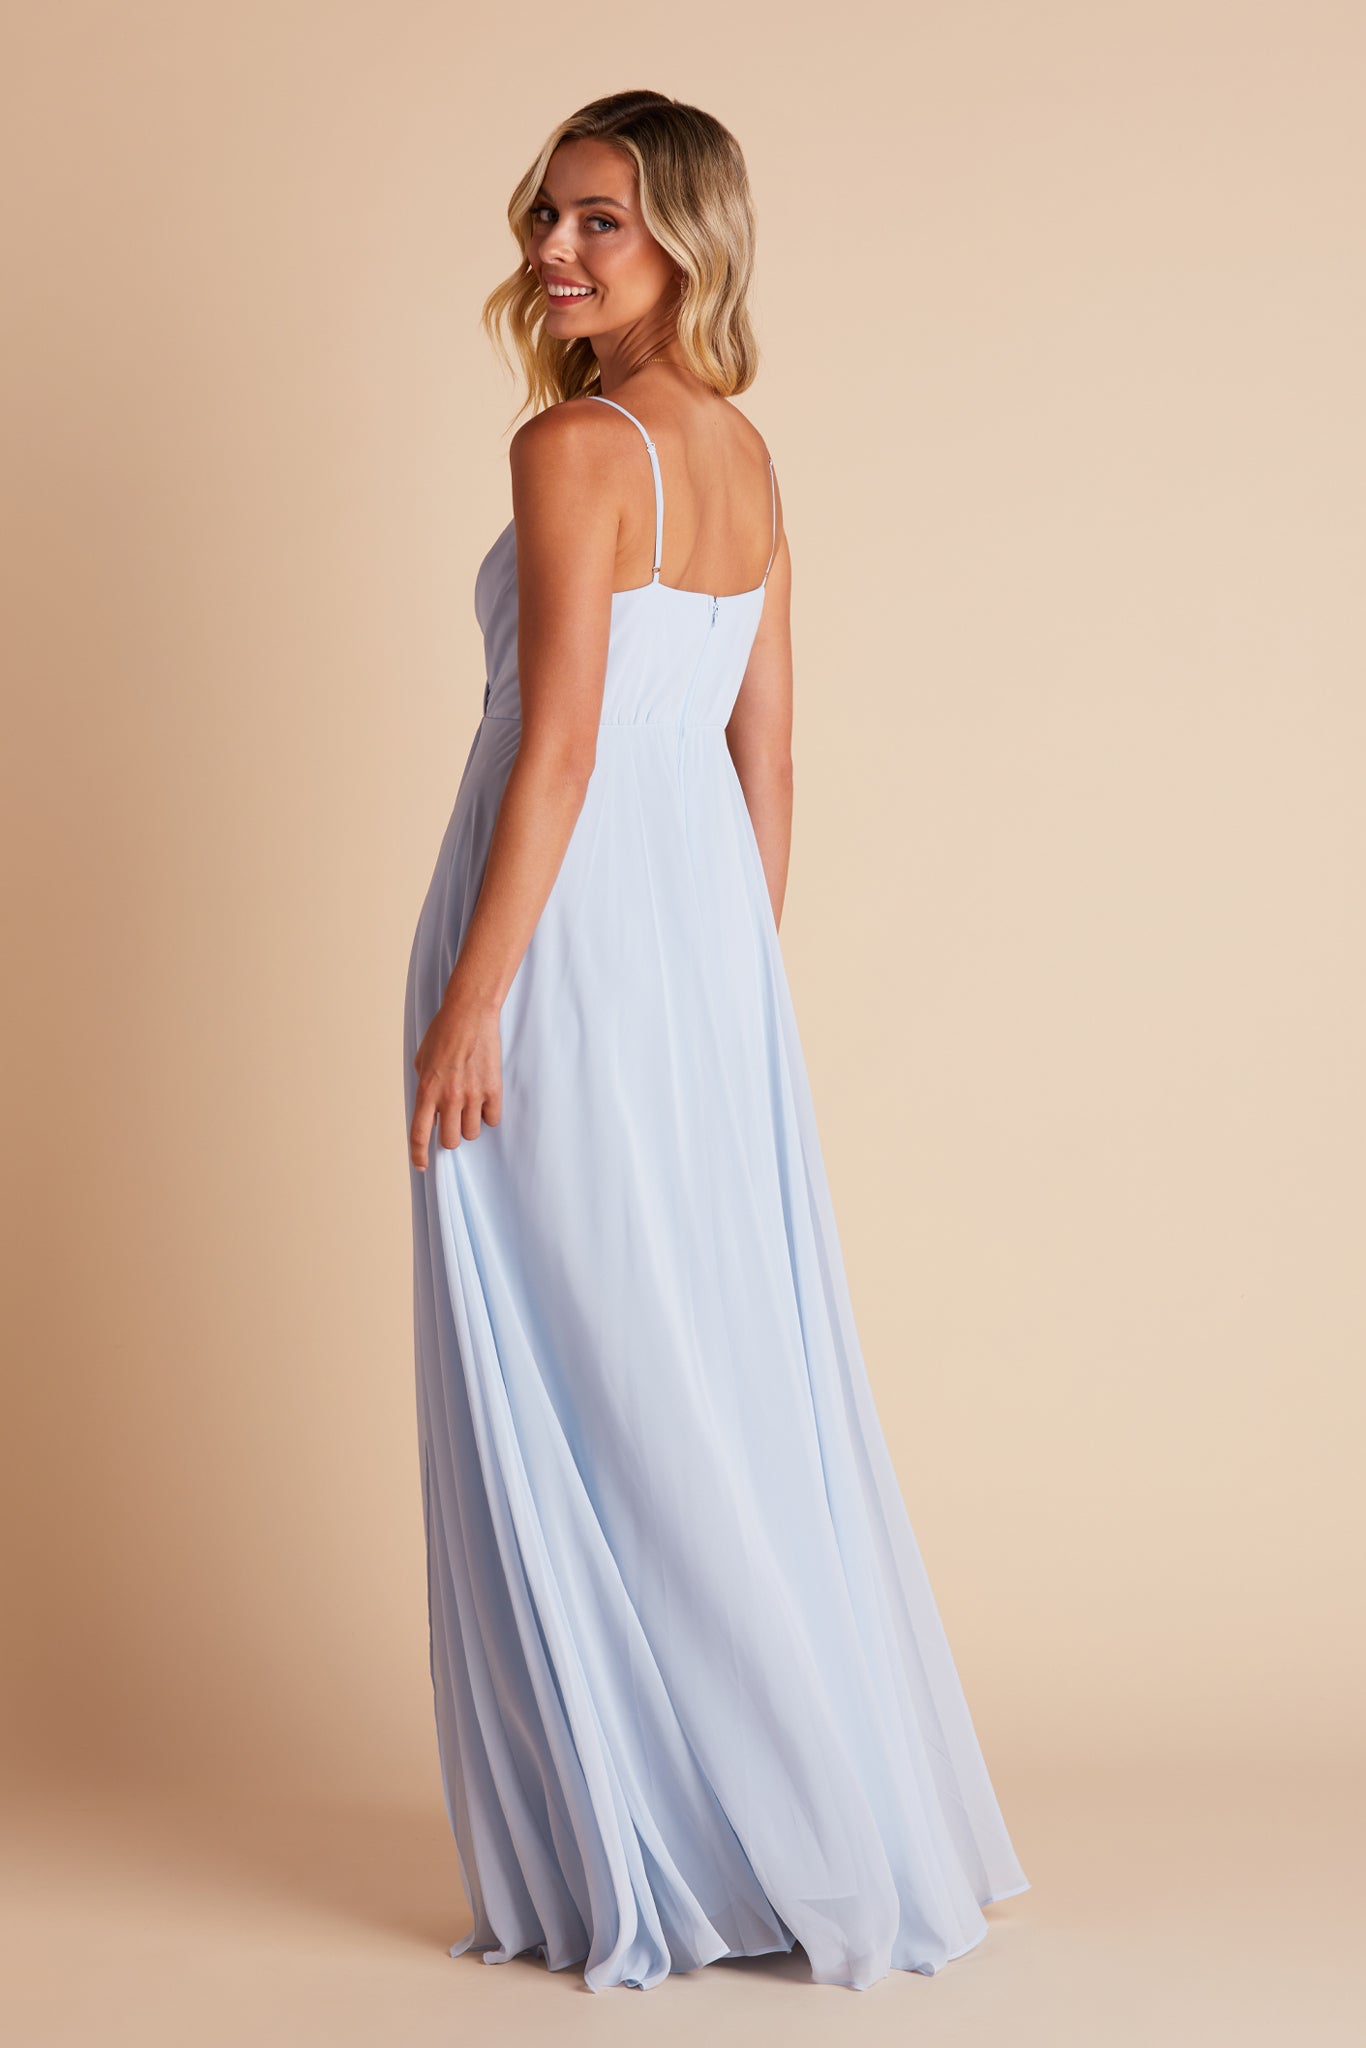 Kaia bridesmaids dress in ice blue chiffon by Birdy Grey, side view